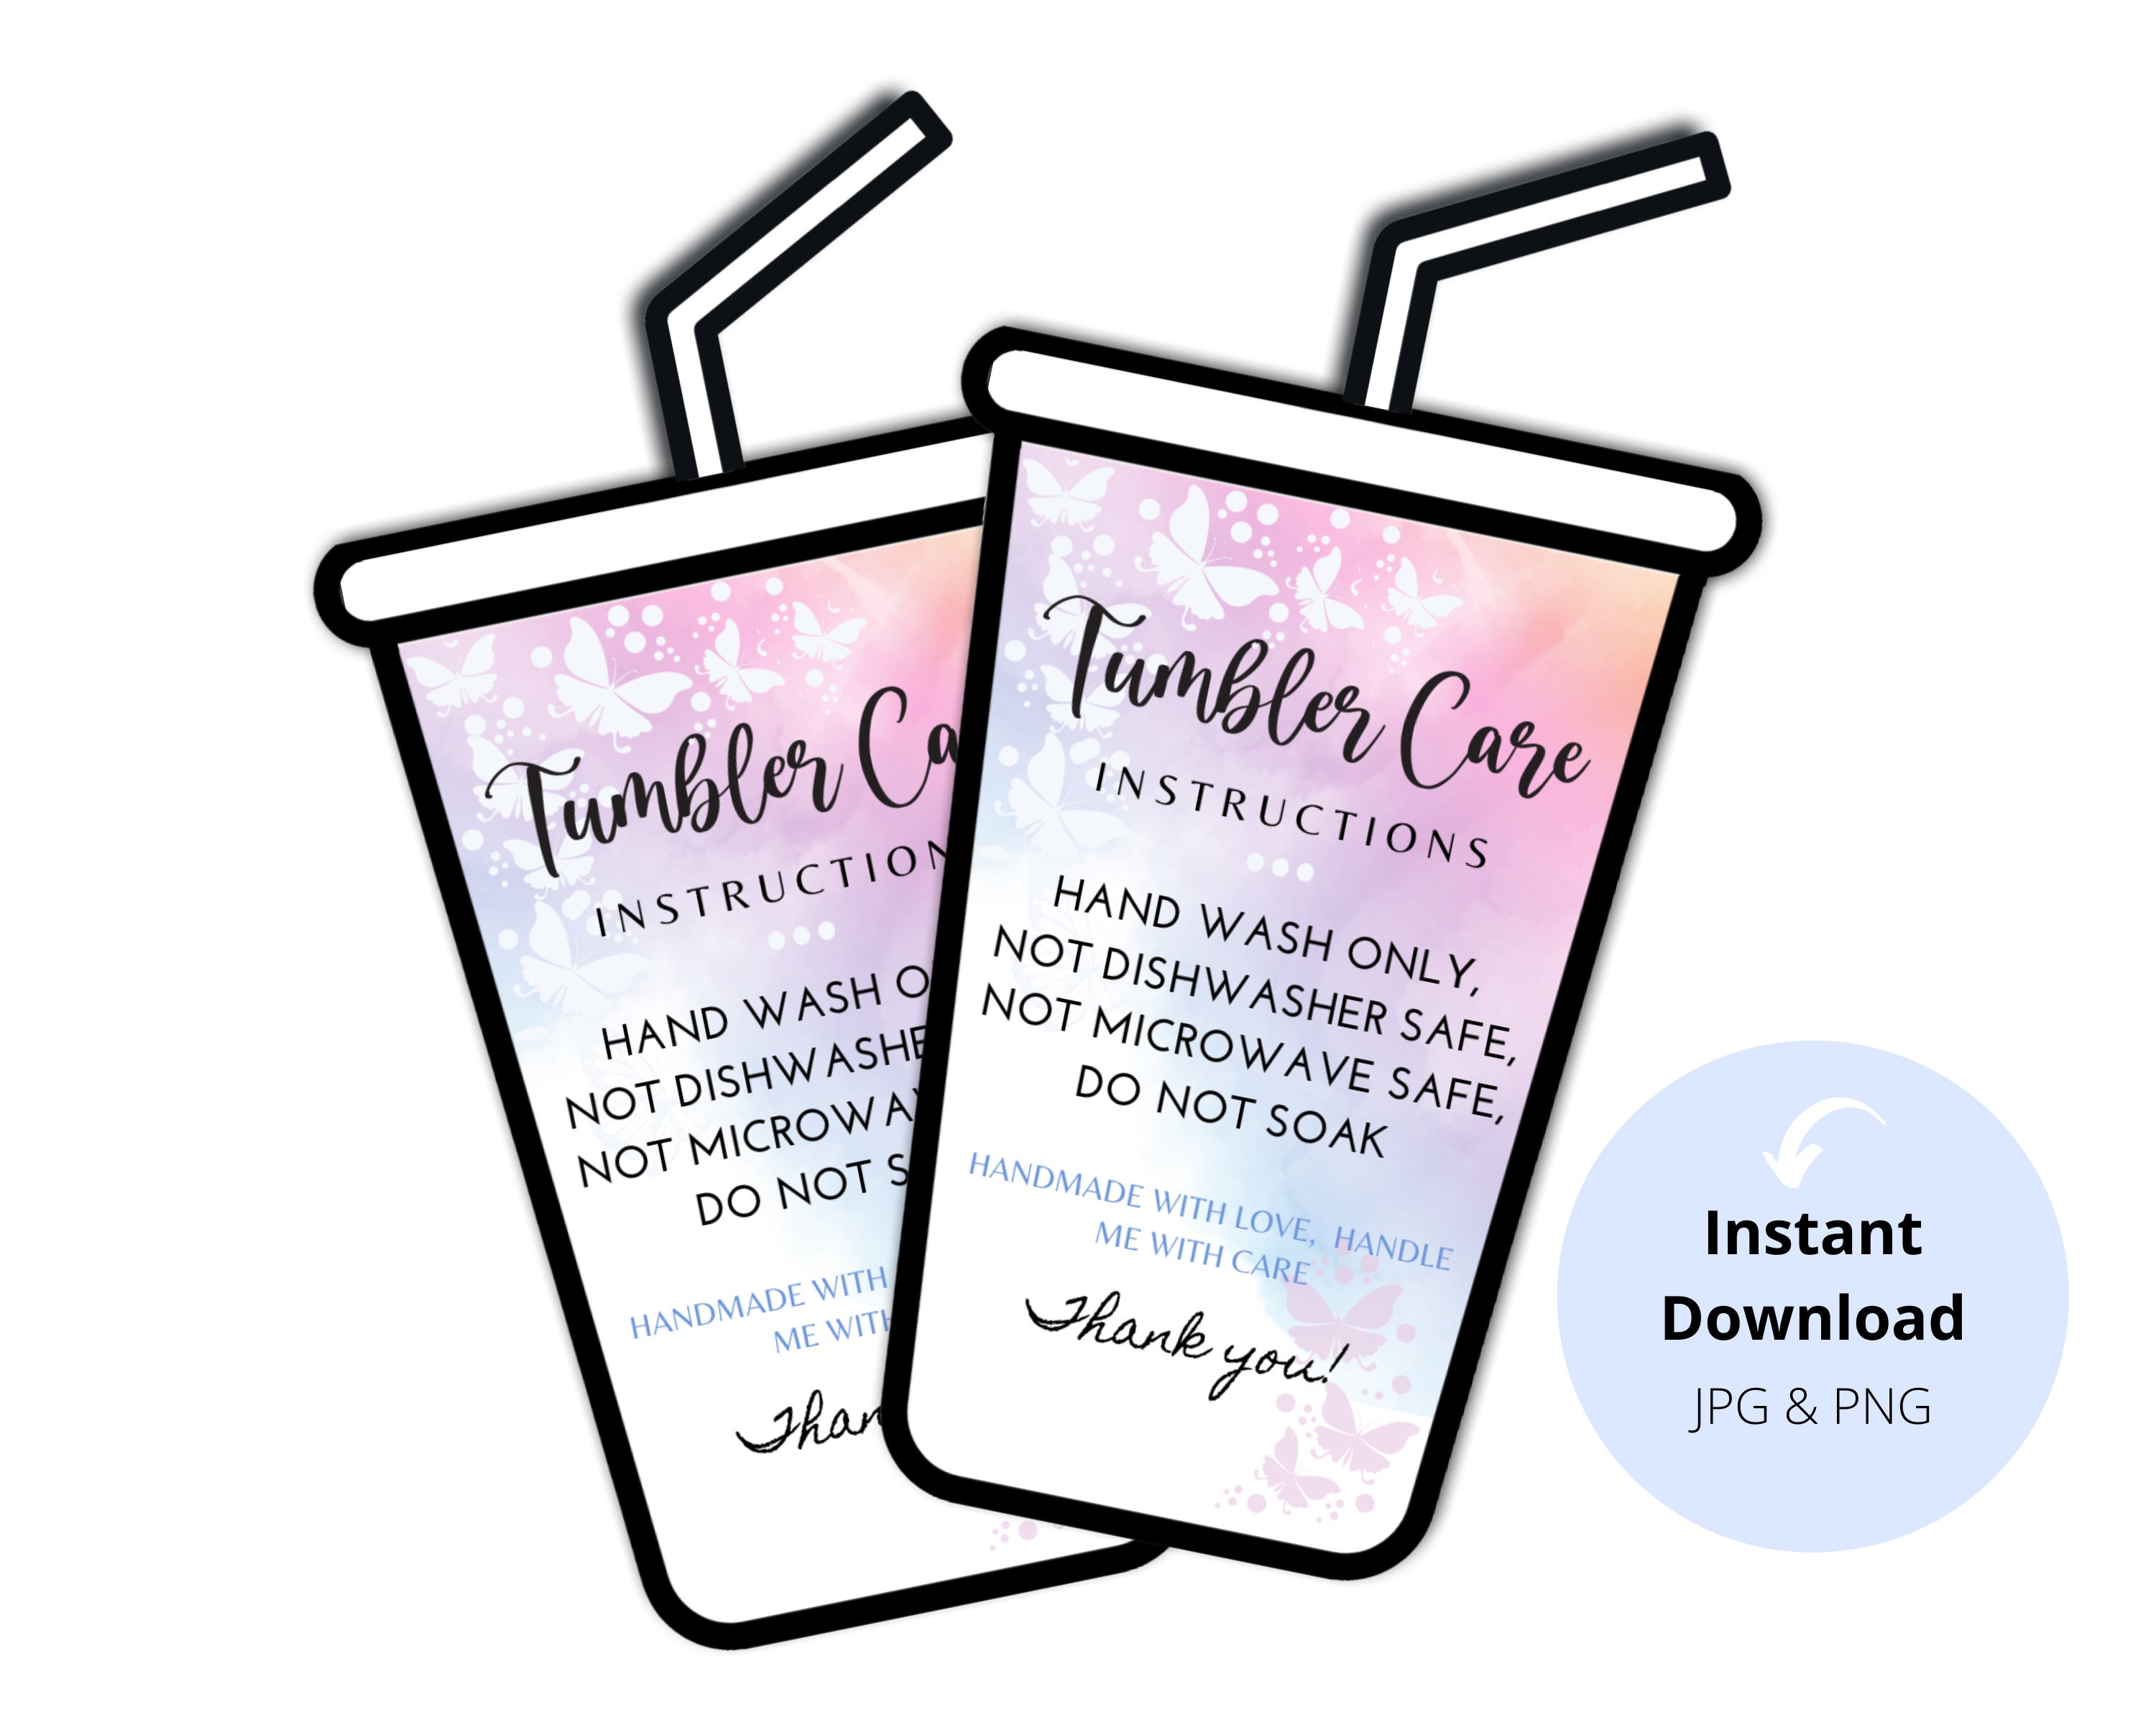 Printable Tumbler Care Cards, Skinny Tumbler Care Instructions, Cold Cup Care  Cards, Cup Care Cards Download, PDF & PNG 